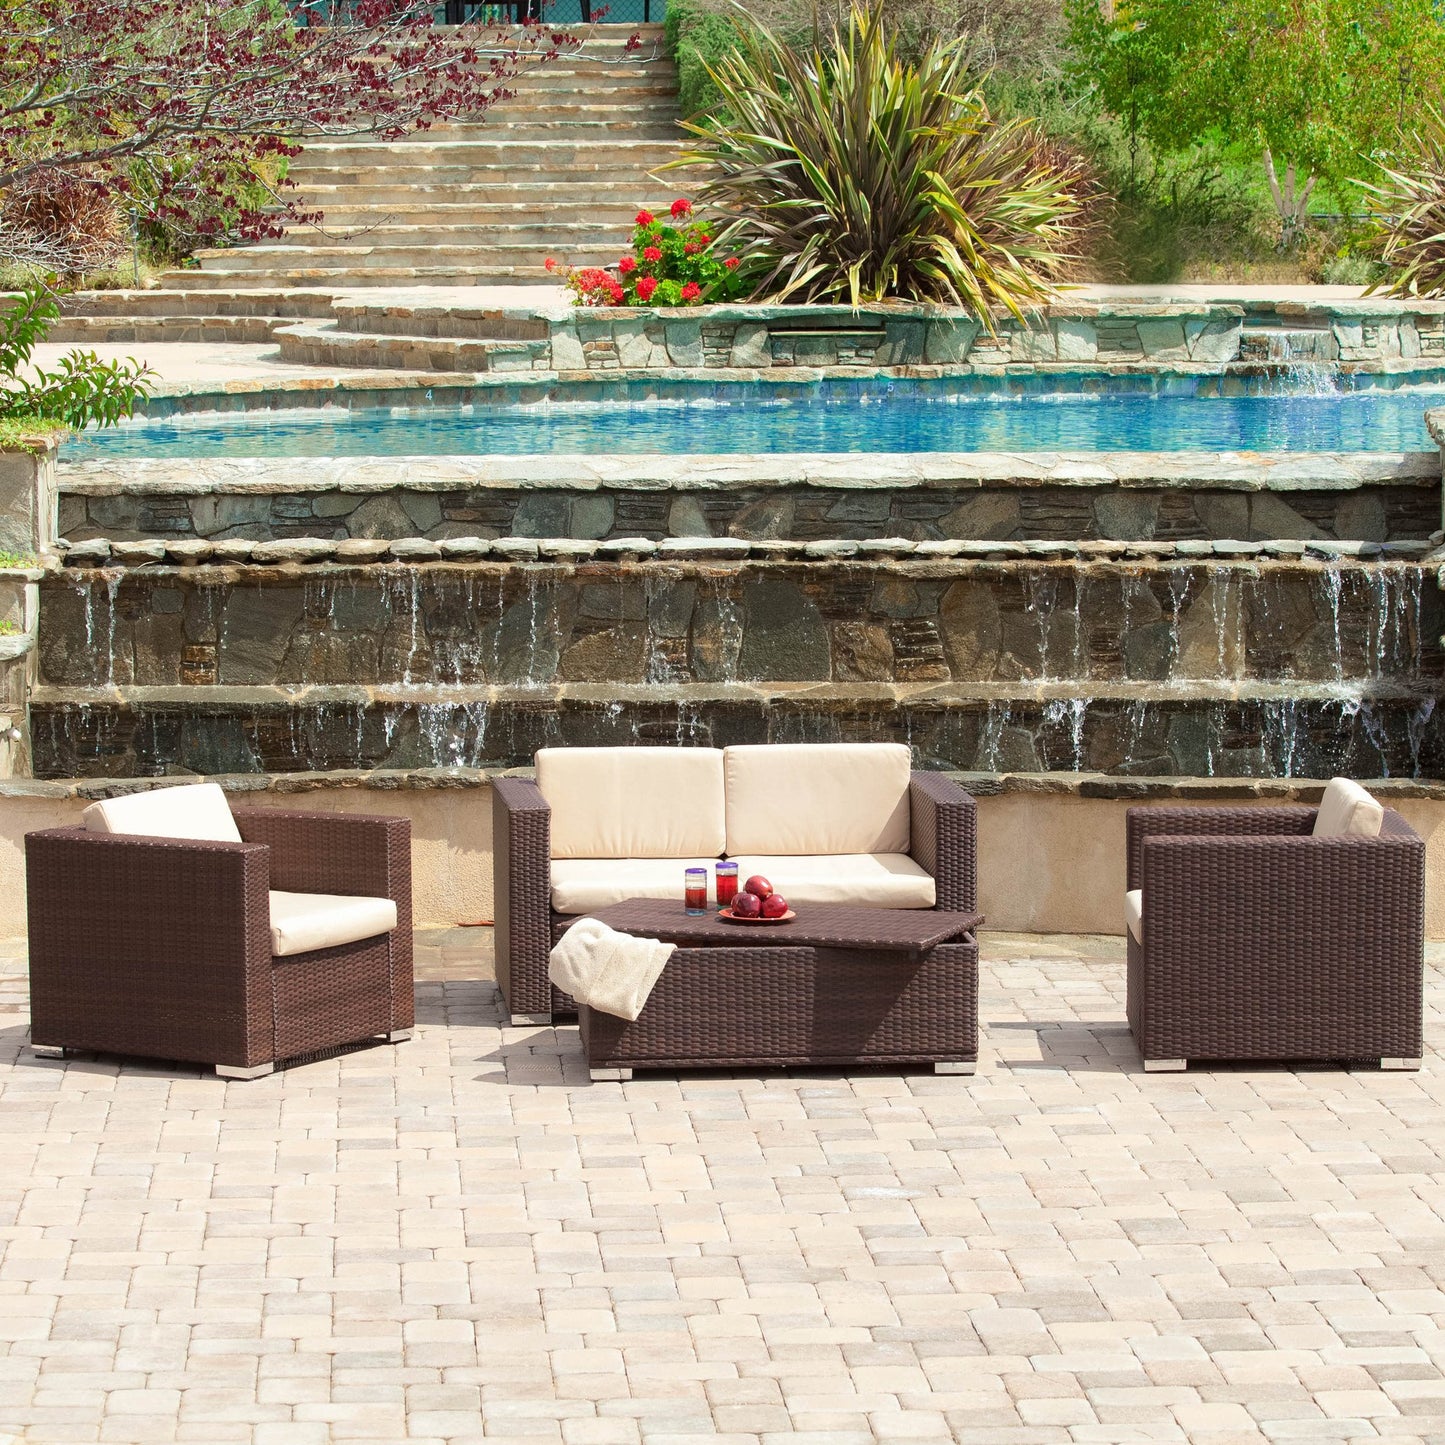 Montague Outdoor 4-Piece Brown Wicker Sofa Set with Storage Ottoman Table